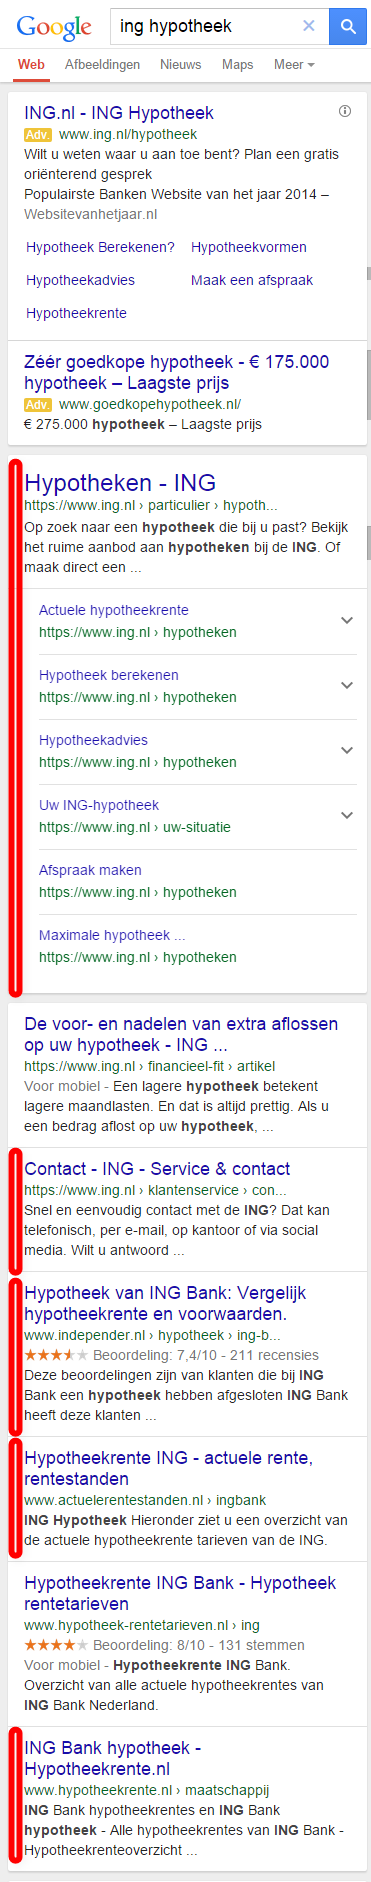 mobile search: ing hypotheek